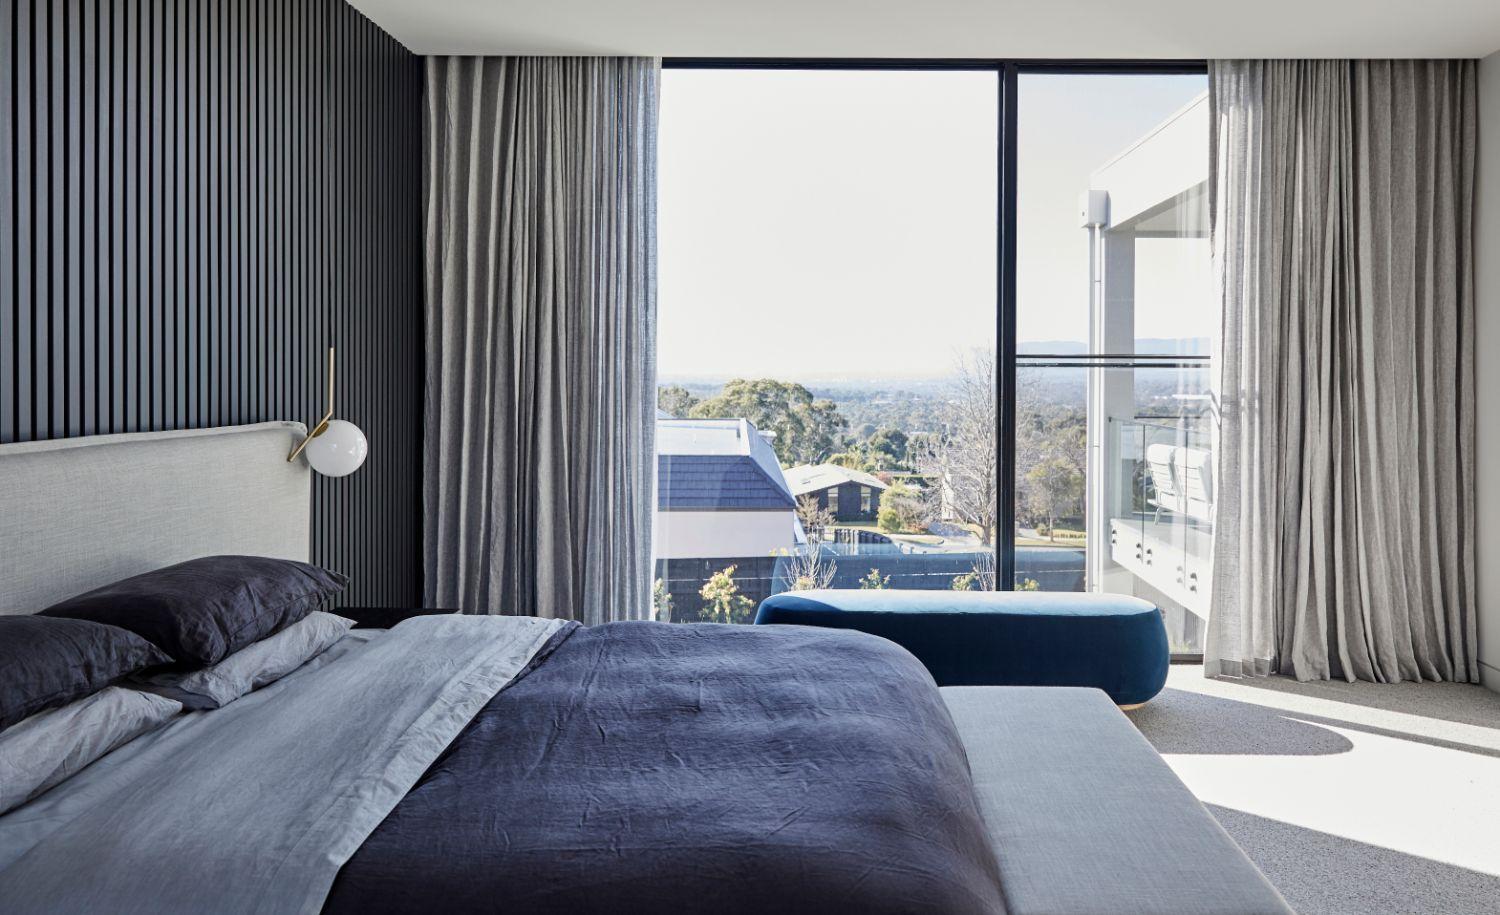 Full Wall Windows In Master Bedroom With A View